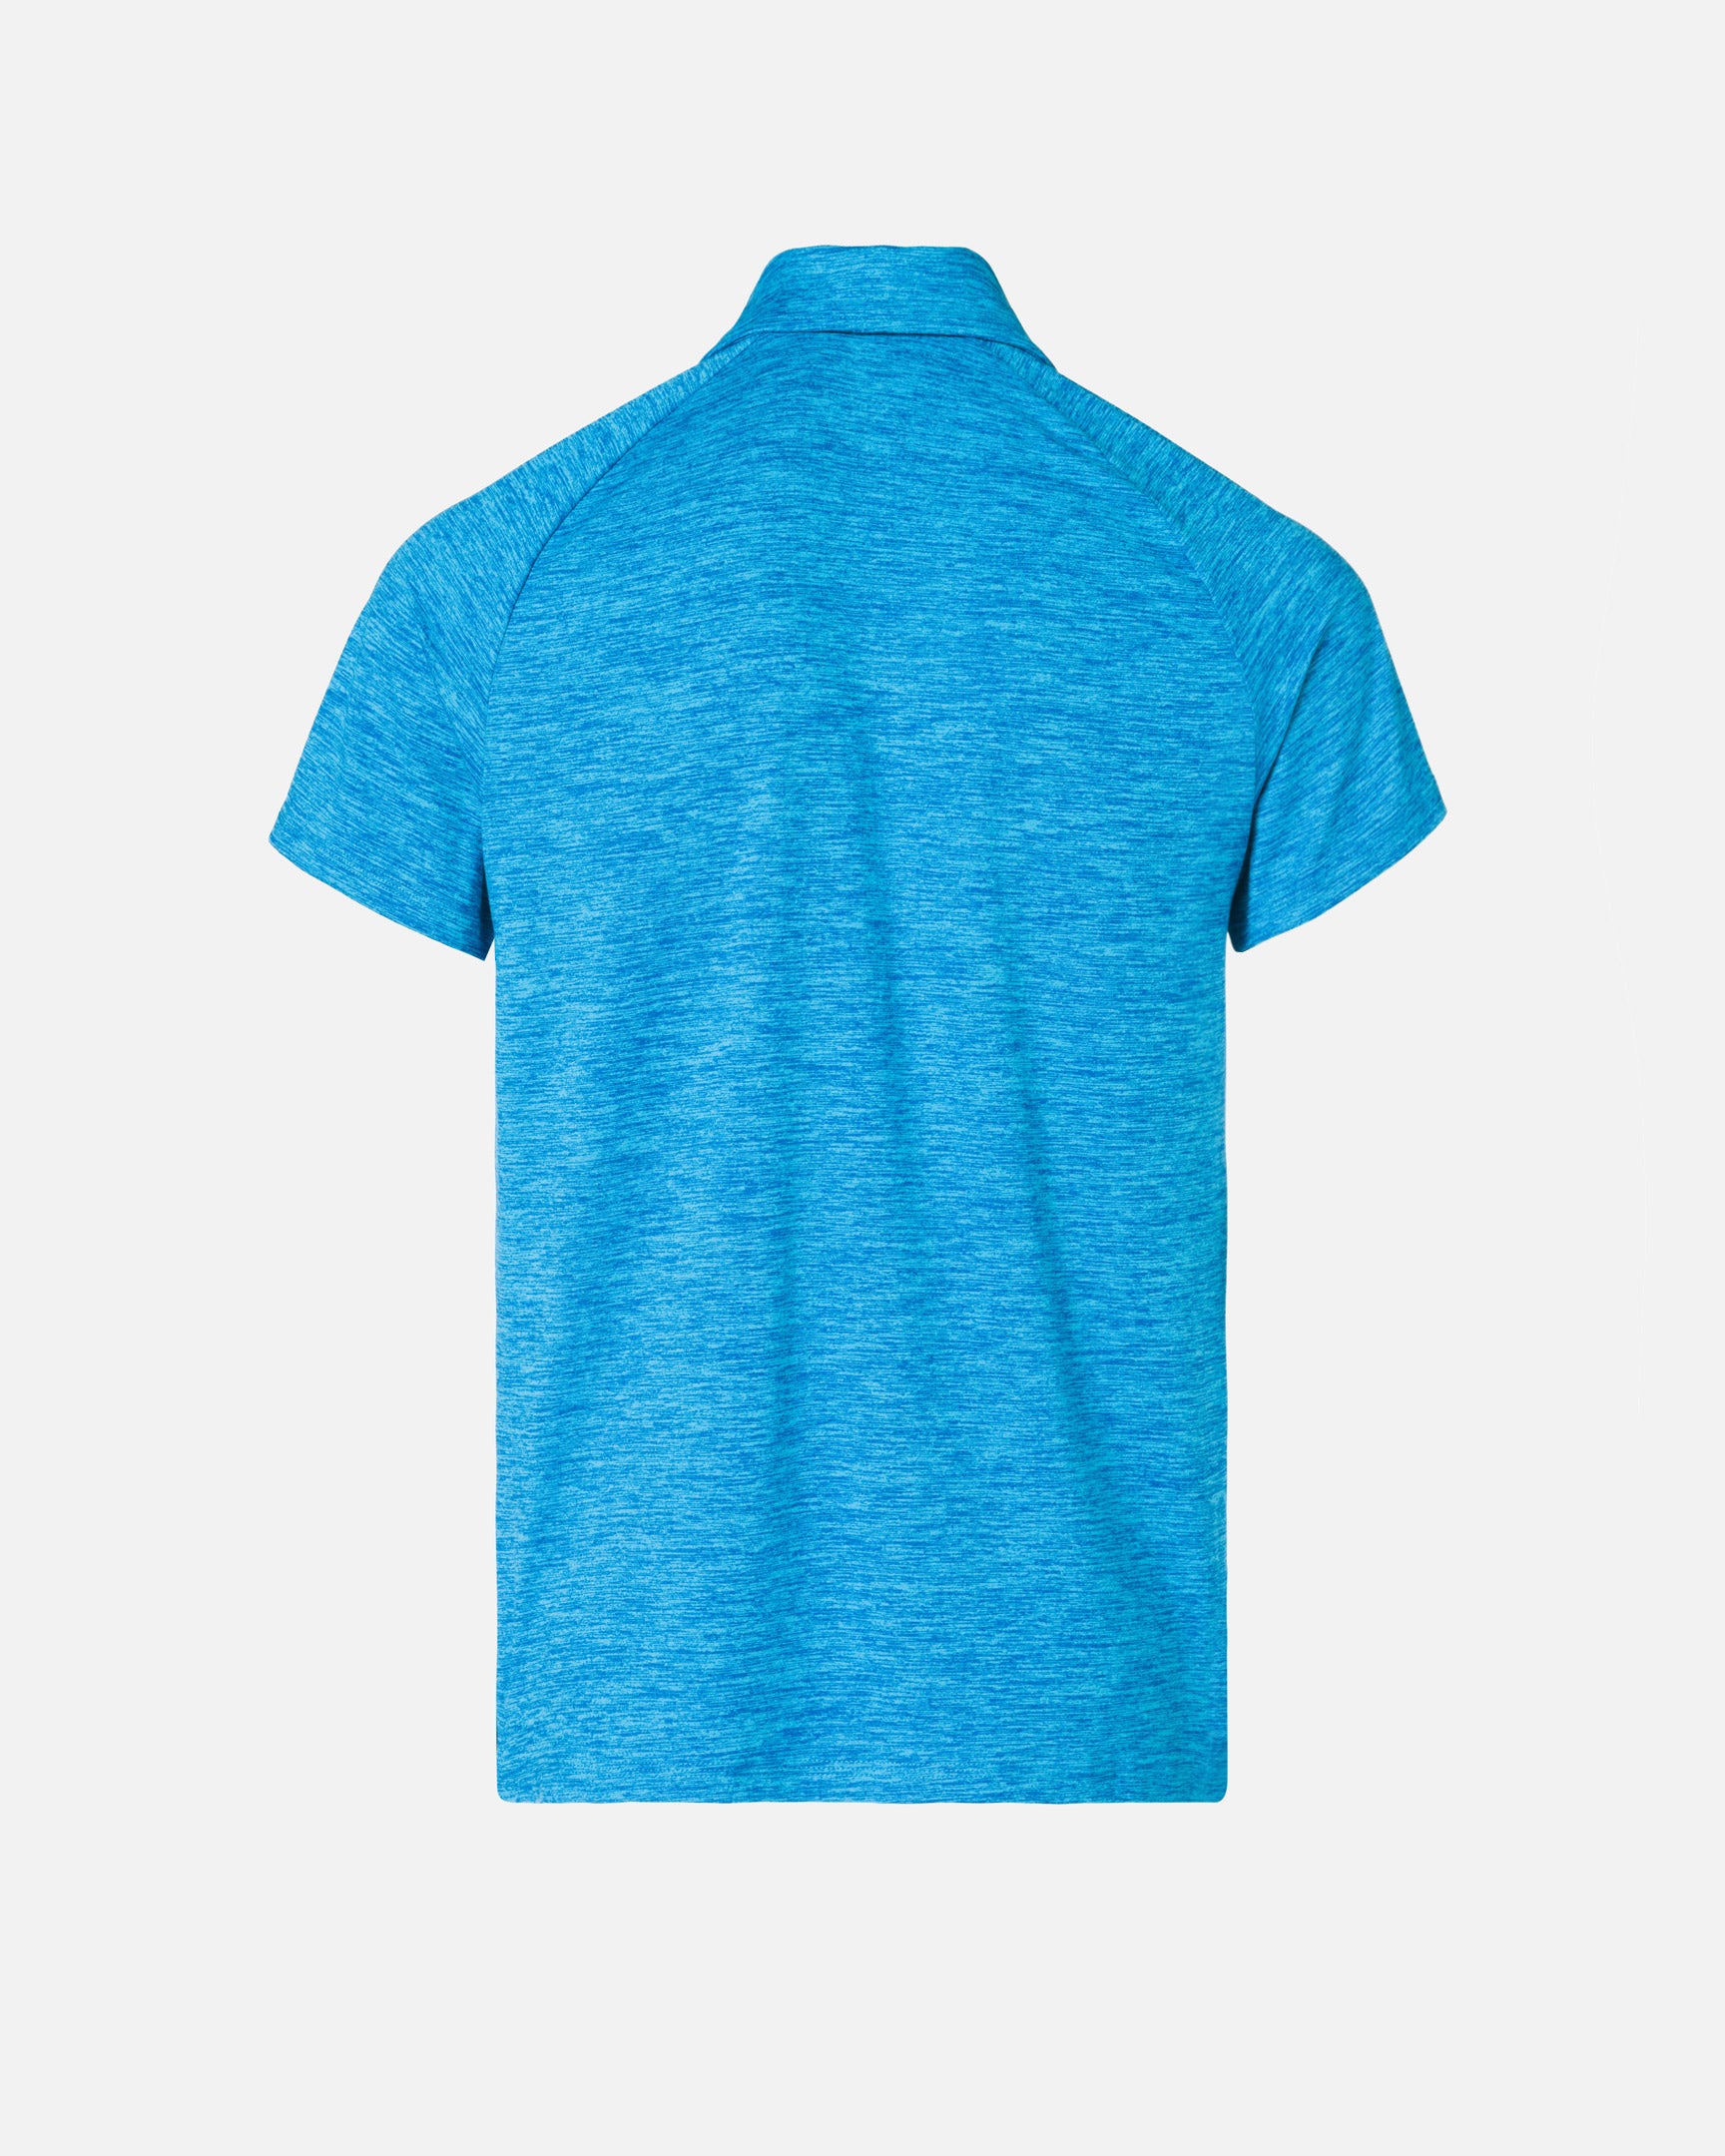 Neon Blue - Essential One And Only Short Sleeve Rashguard | Hurley